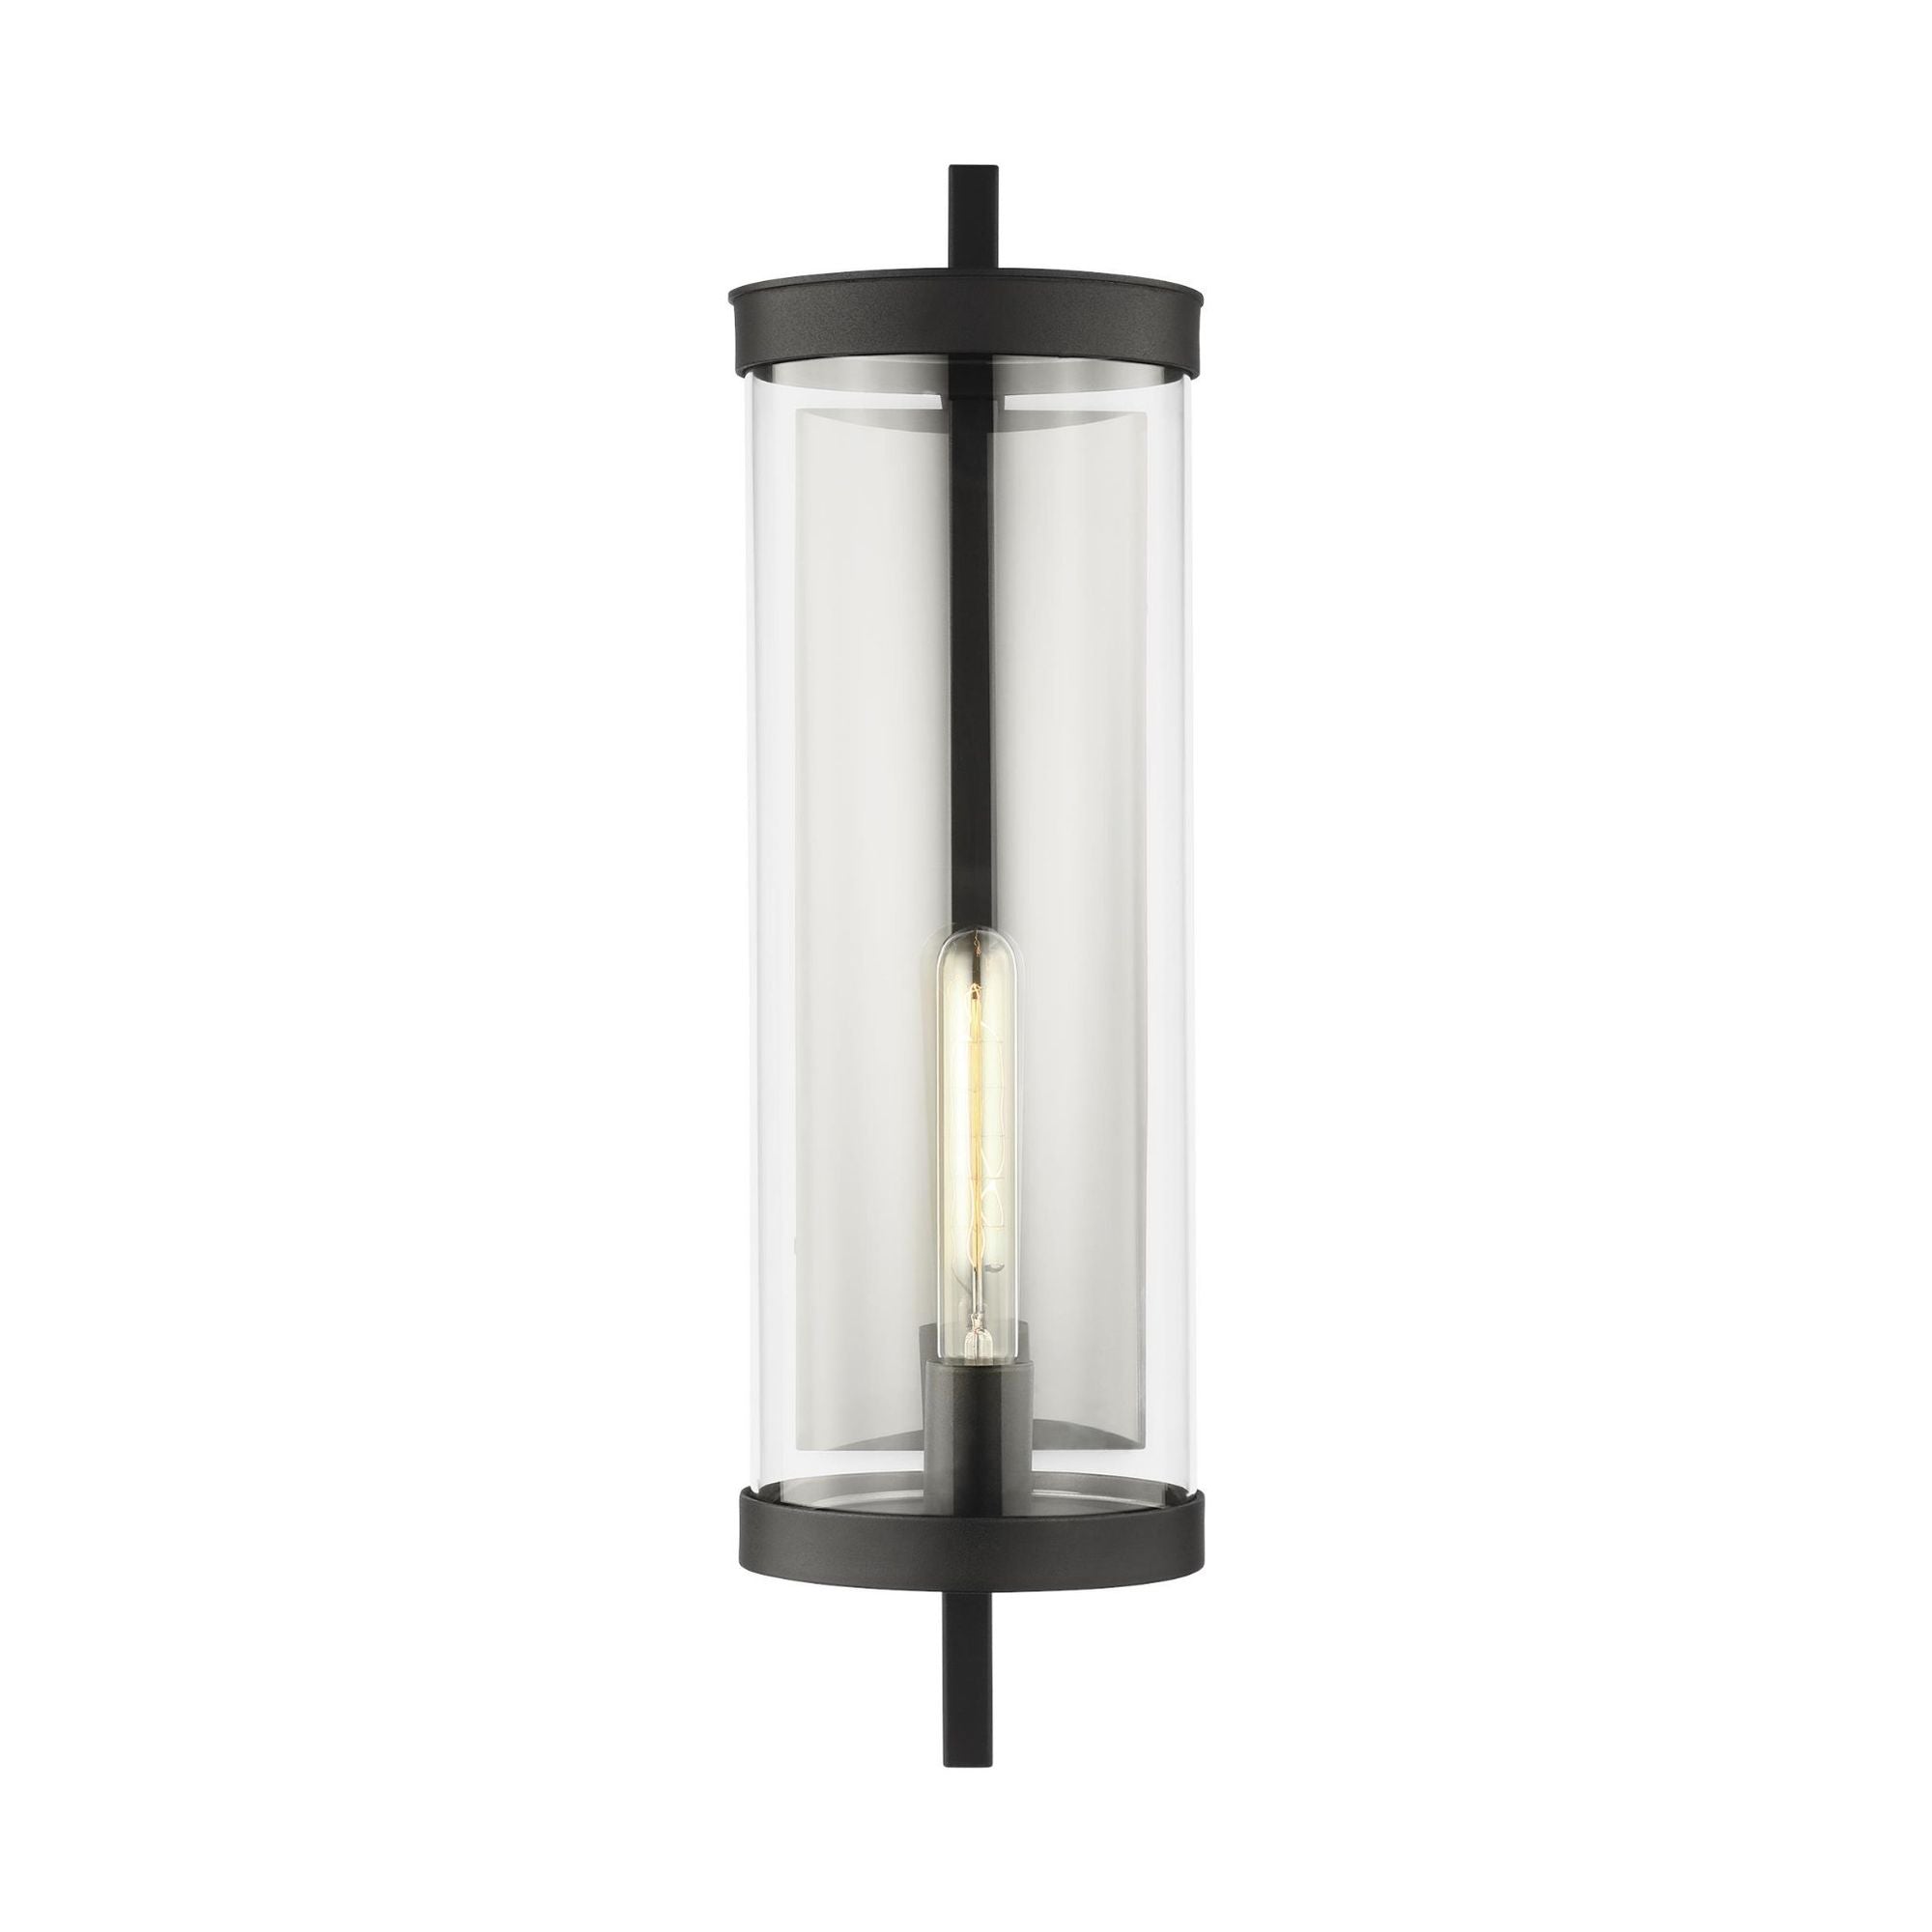 Chapman & Myers Eastham Large Wall Lantern in Textured Black